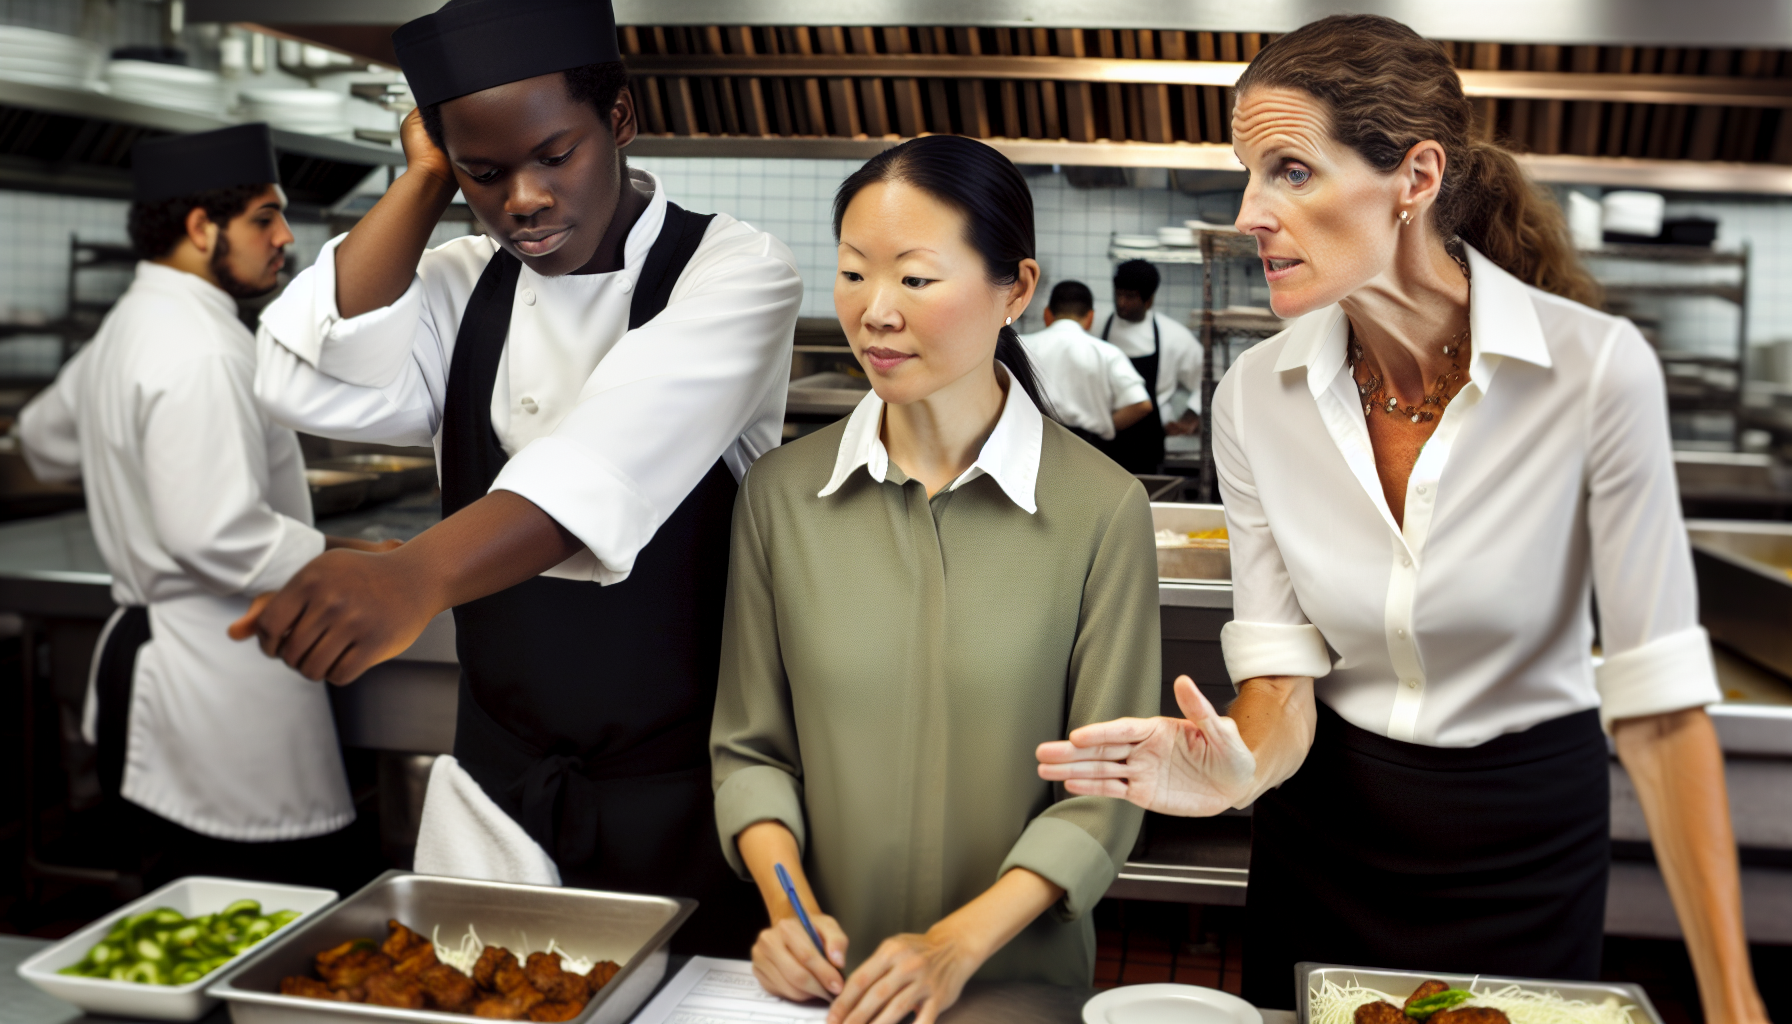 Employees working together in a restaurant, reflecting the restaurant's core values and mission